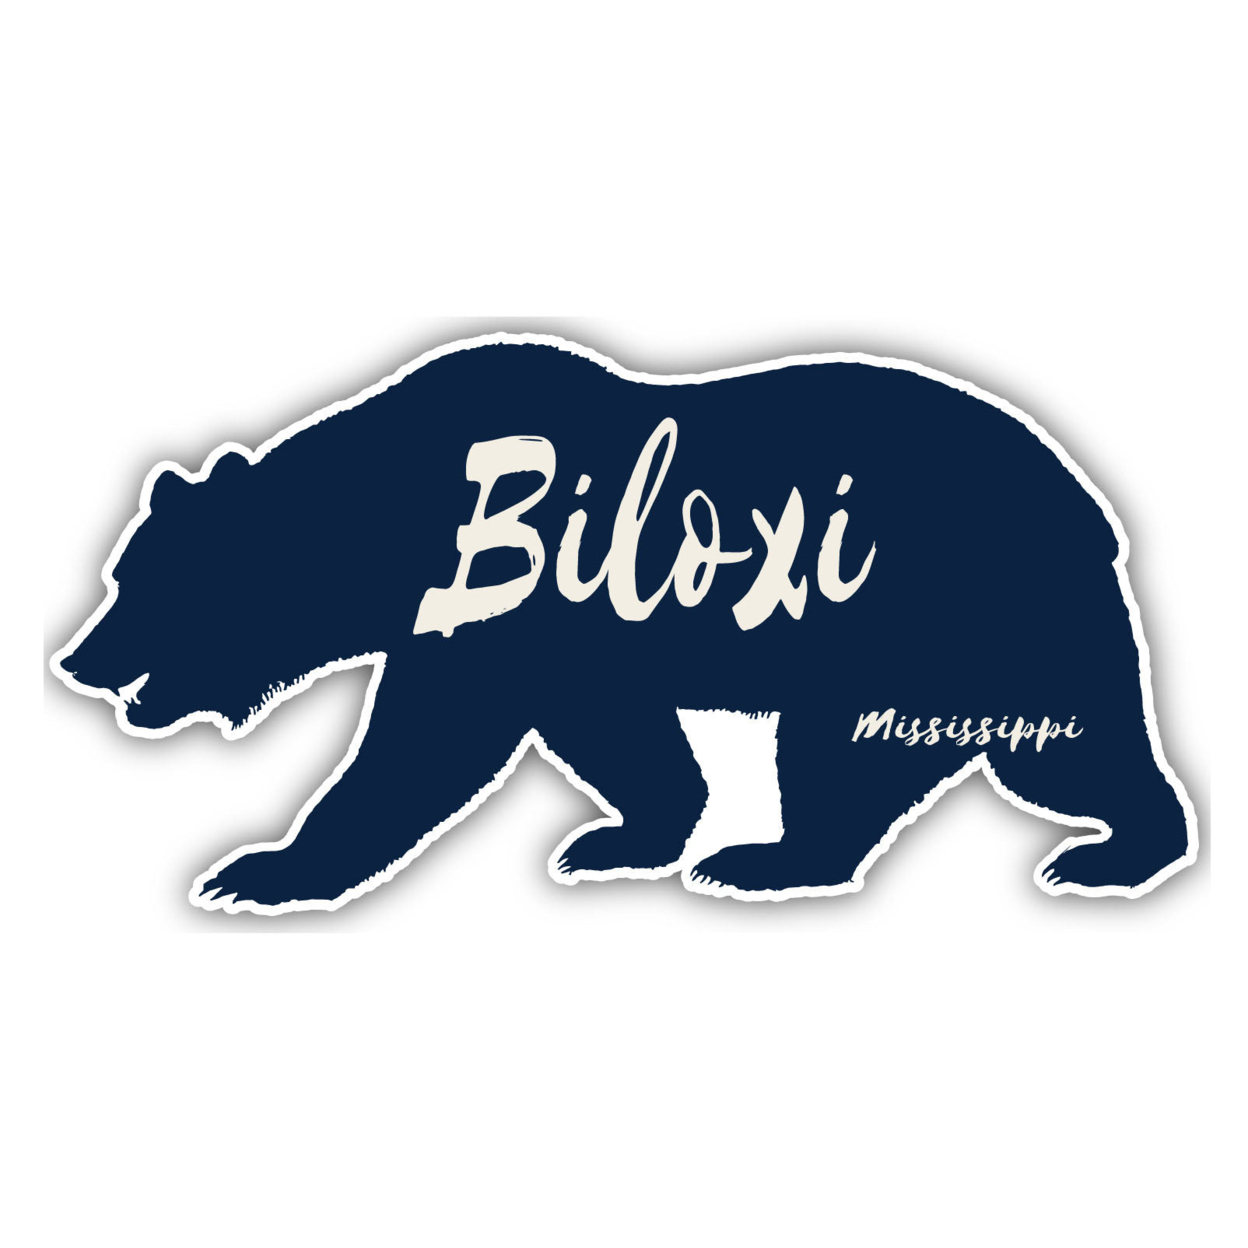 Biloxi Mississippi Souvenir Decorative Stickers (Choose Theme And Size) - 4-Pack, 4-Inch, Tent